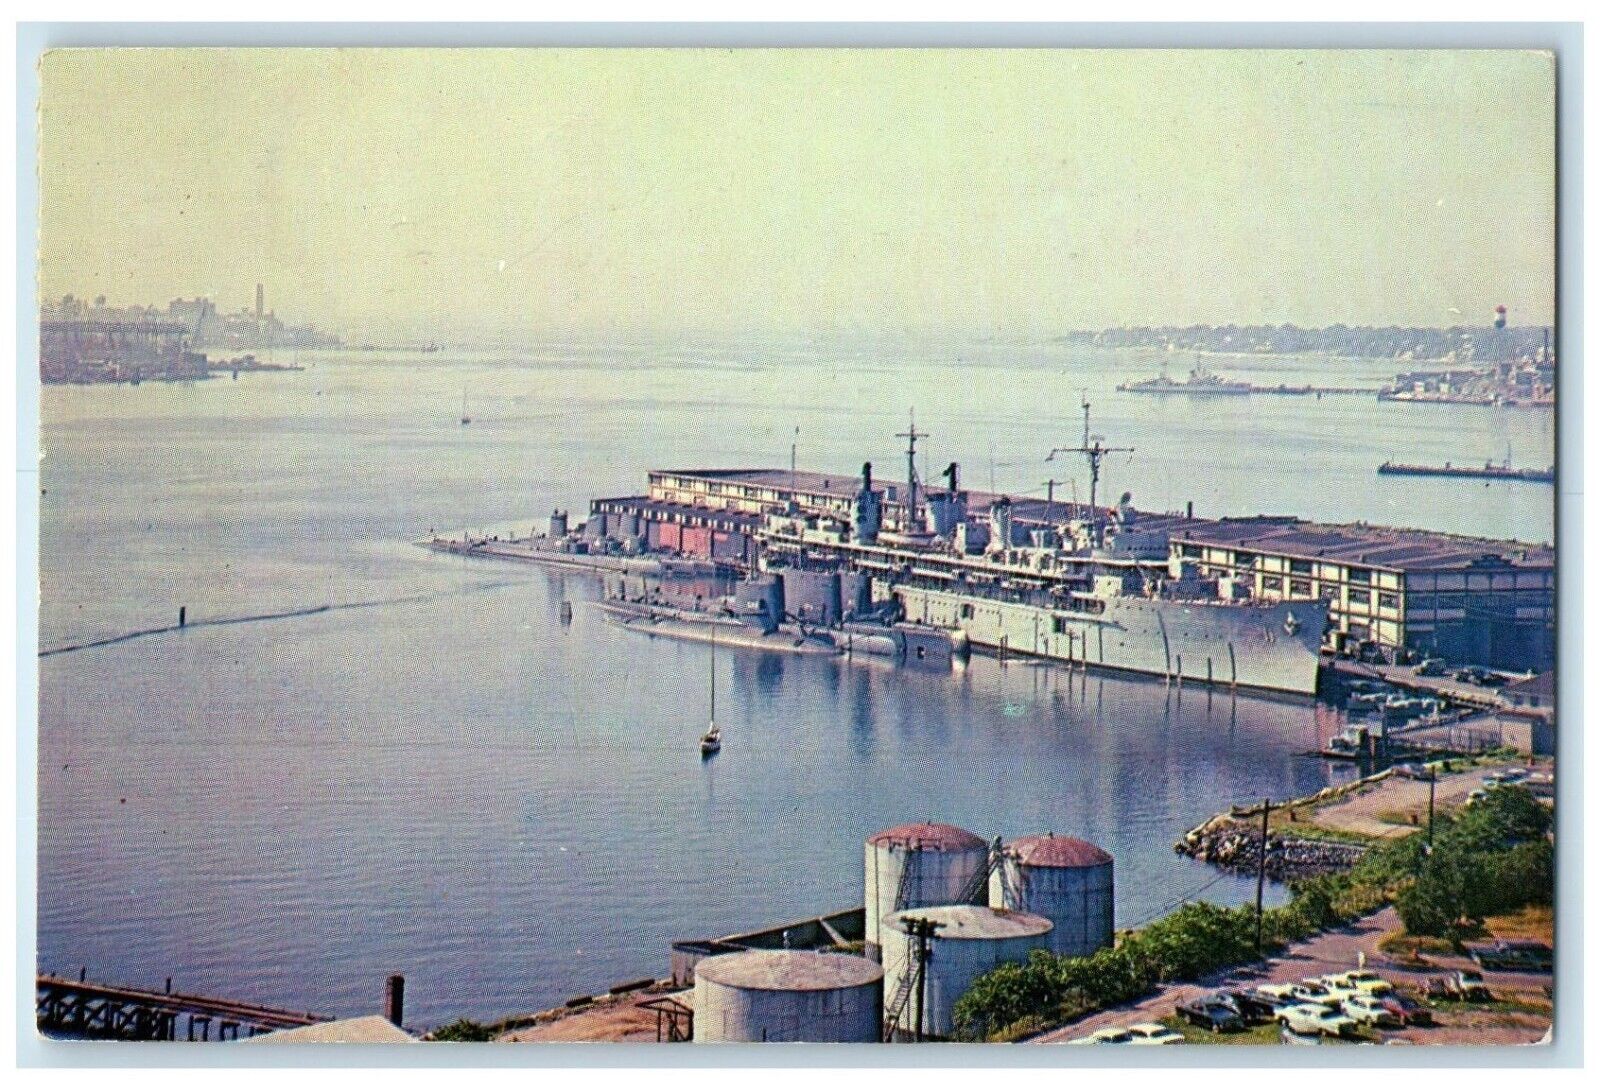 1966 Submarine Tender USS Fulton AS 11 At State Pier New London CT Postcard